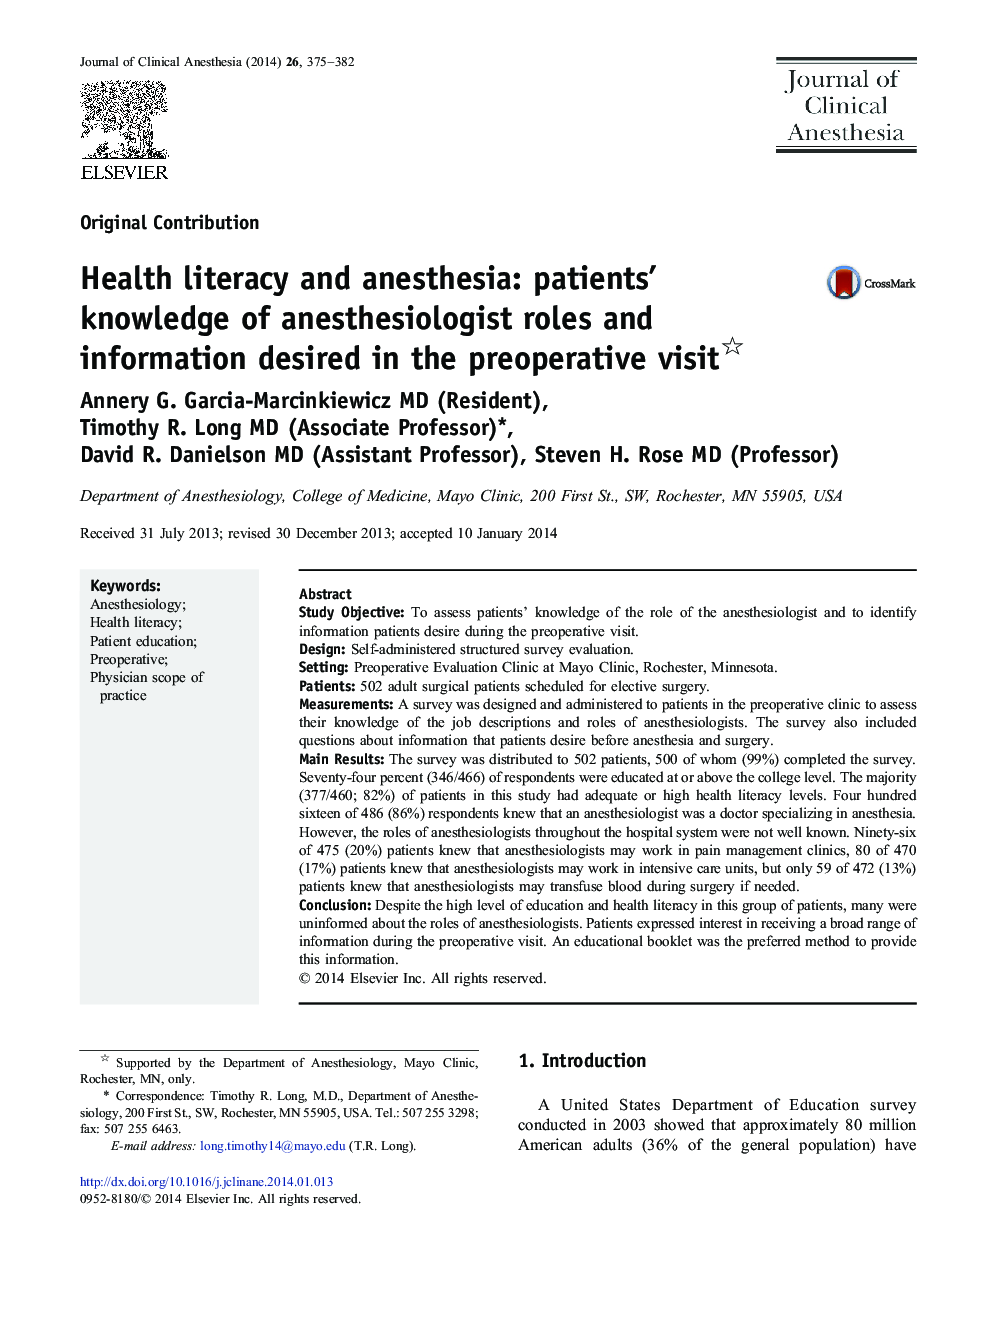 Health literacy and anesthesia: patients’ knowledge of anesthesiologist roles and information desired in the preoperative visit 